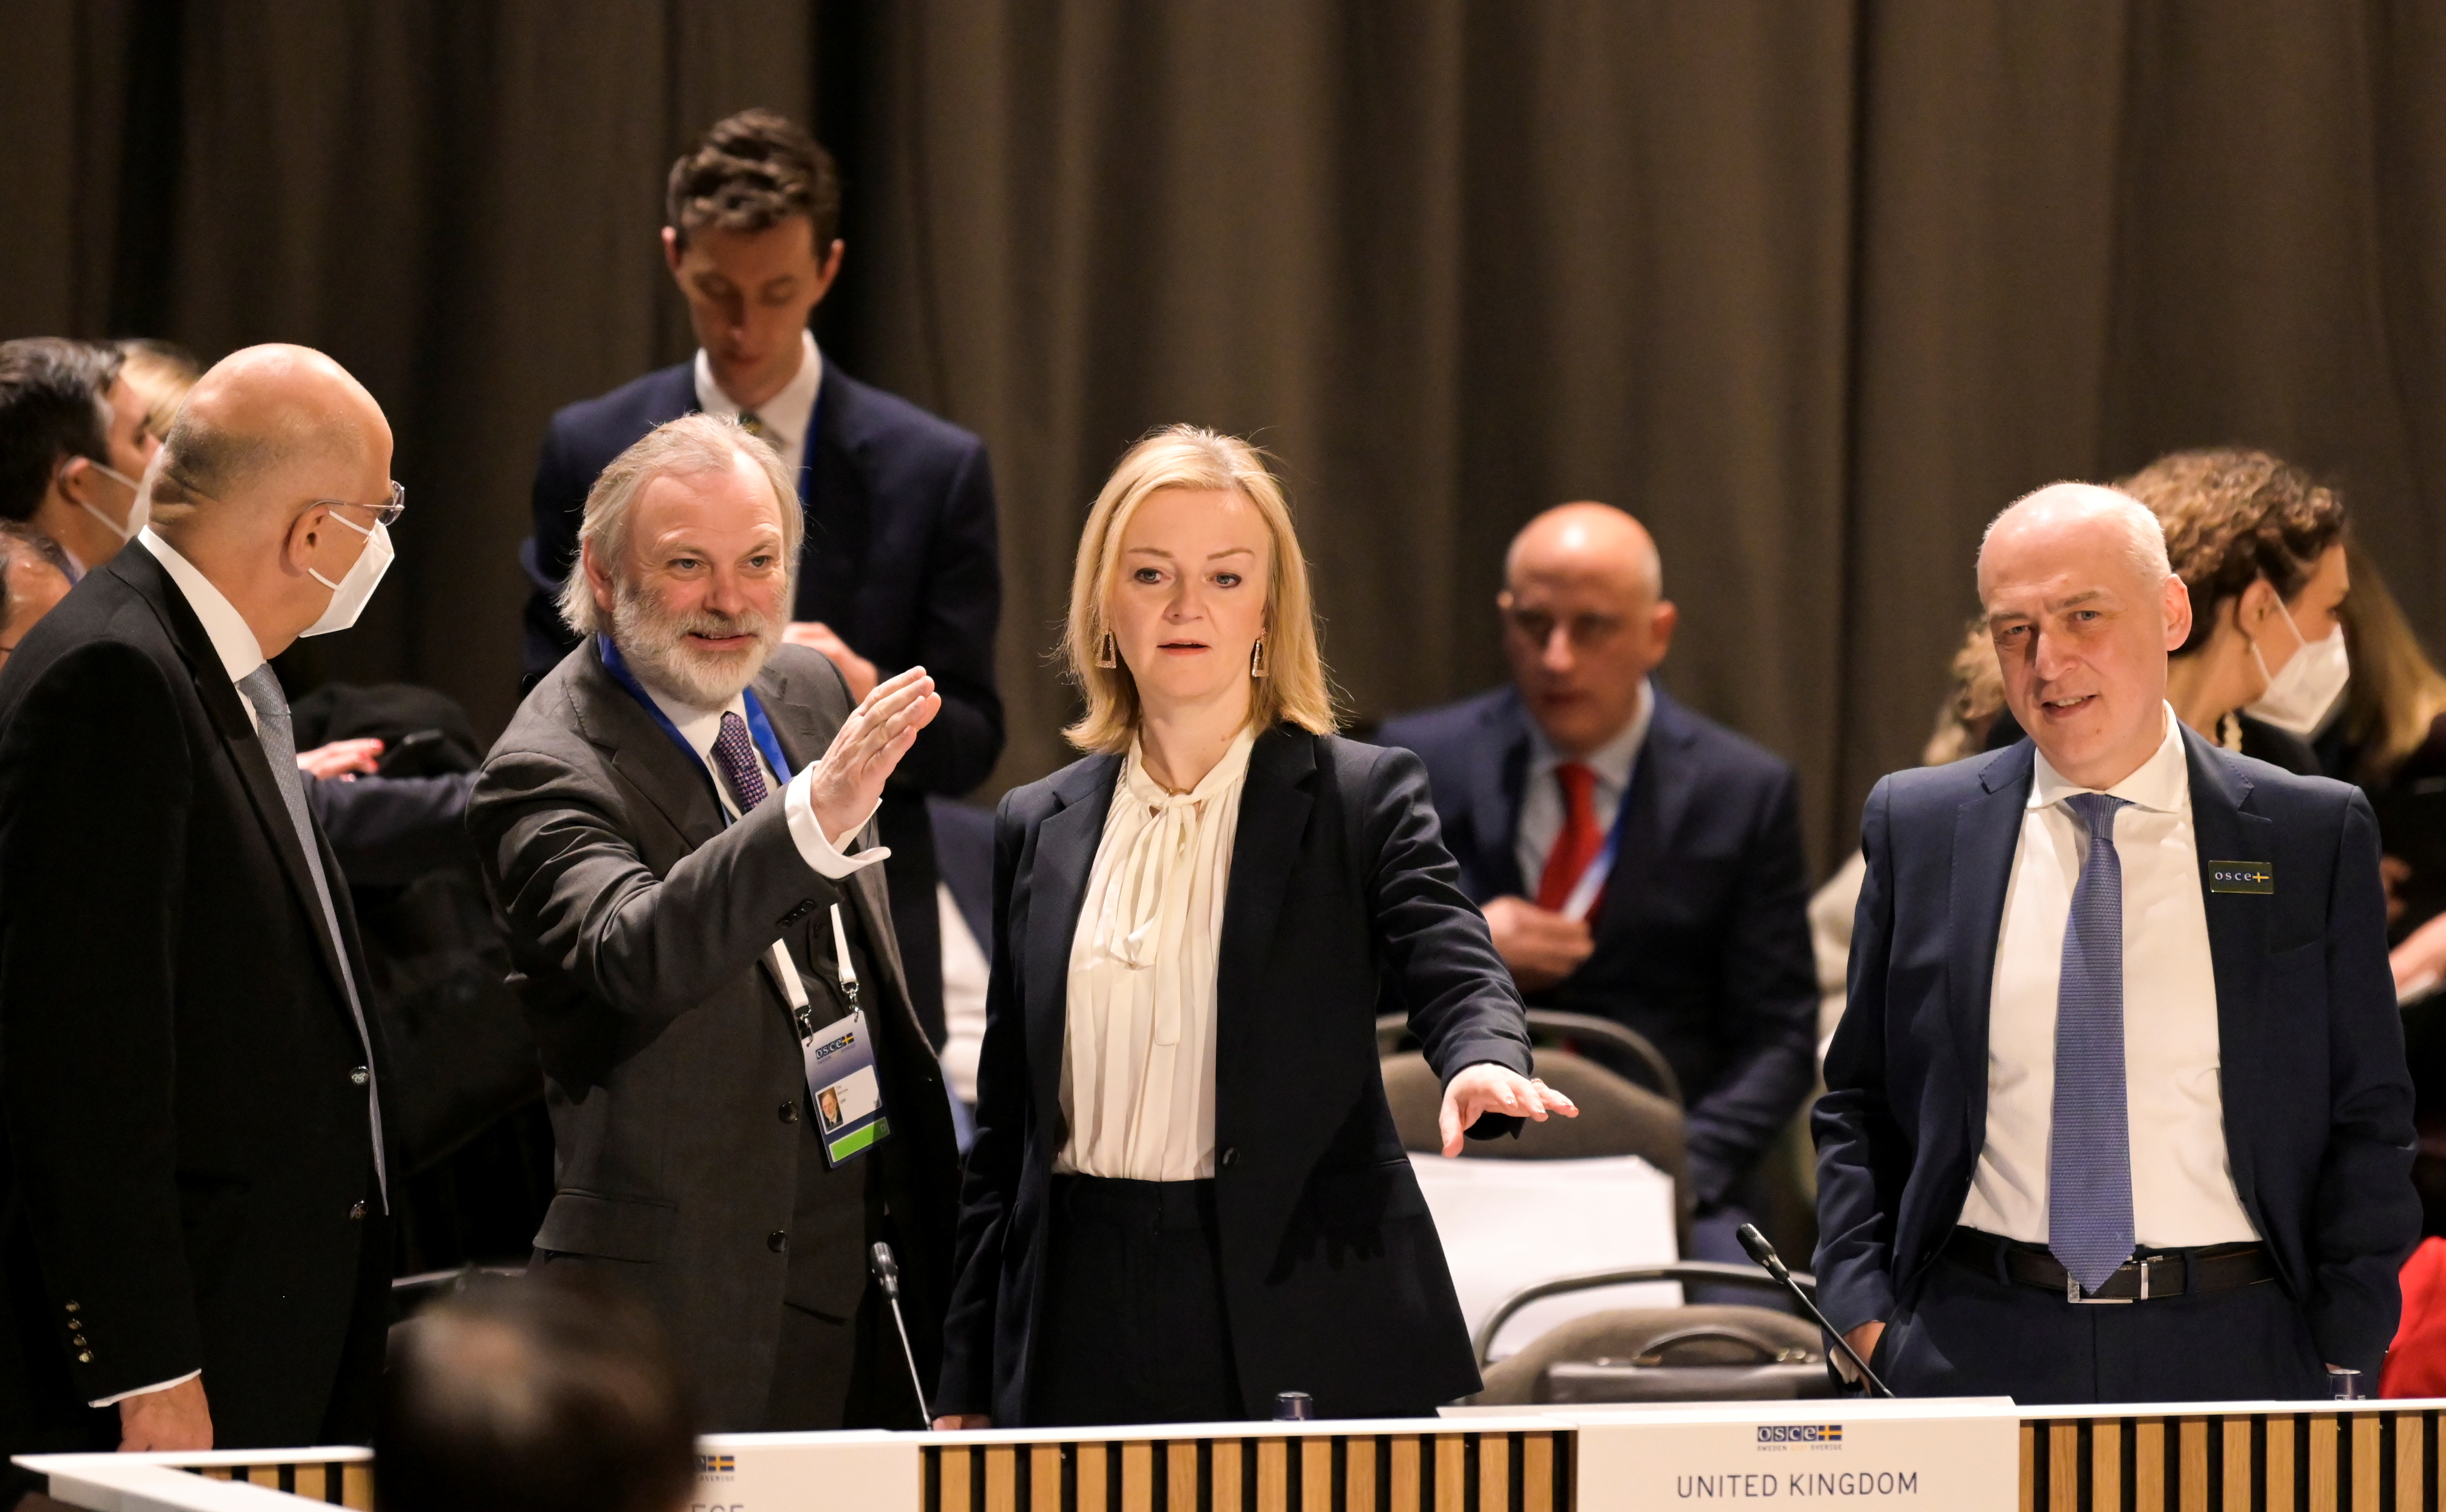 OSCE meeting in Stockholm